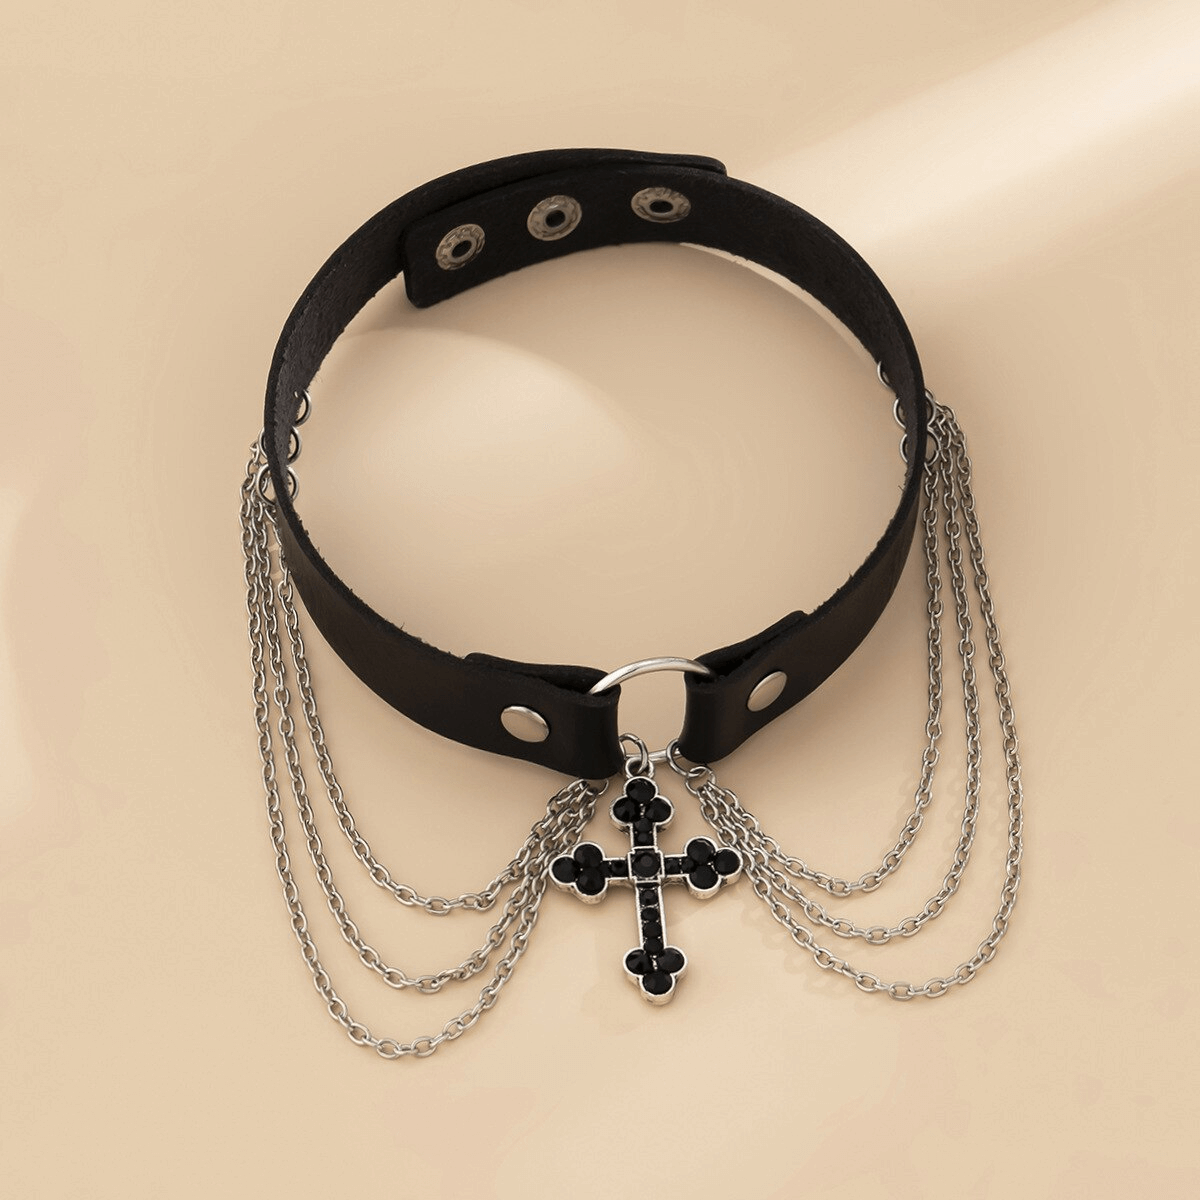 Gothic Pu Leather Black Cross Necklace / Punk Grunge Accessories for Women - HARD'N'HEAVY